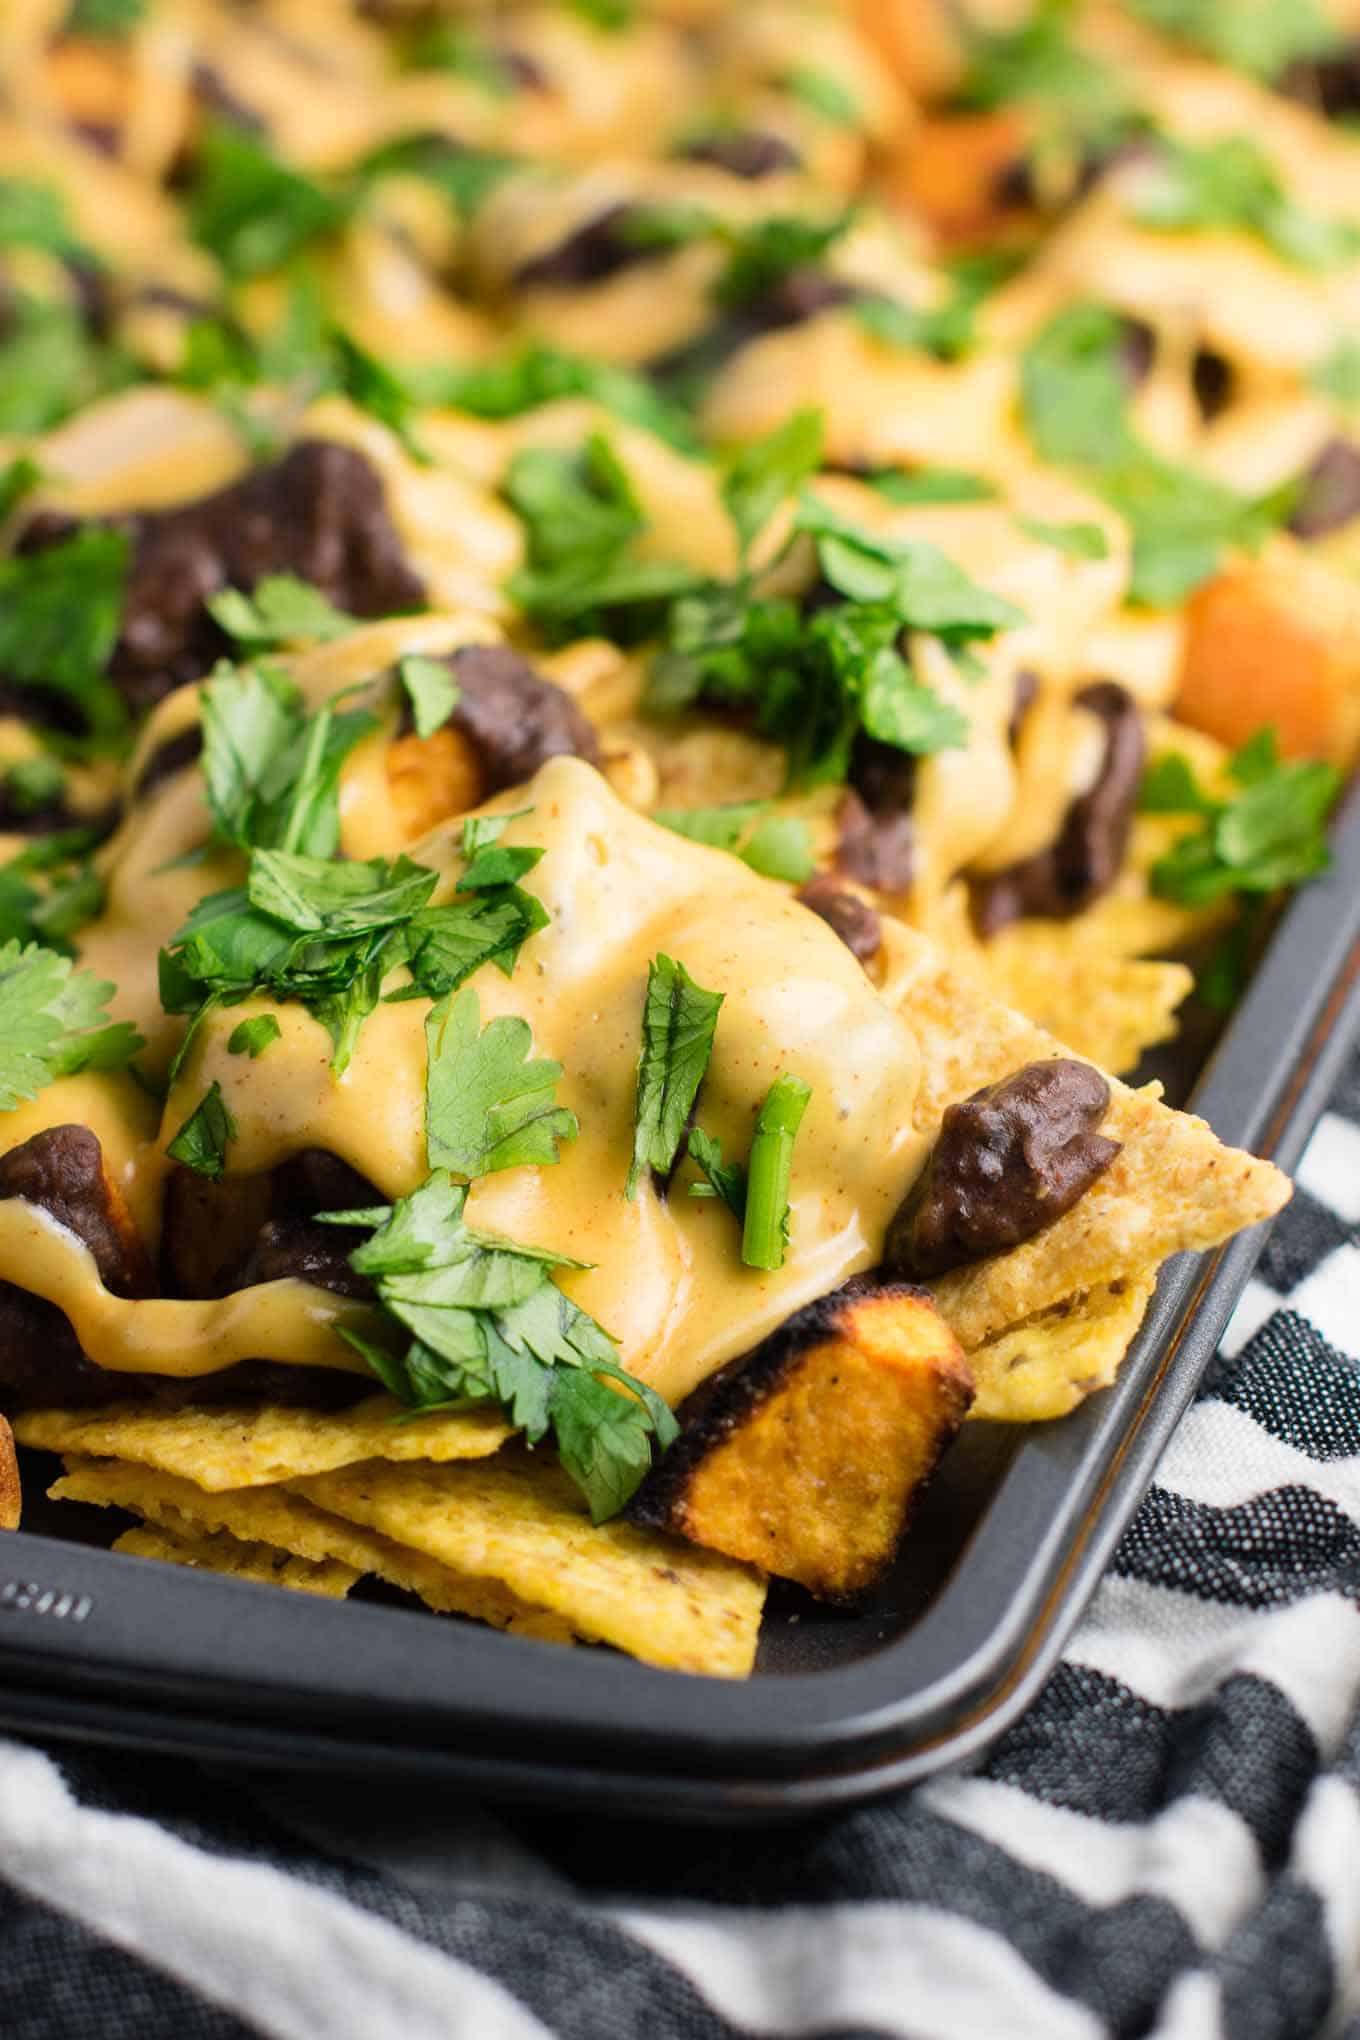 30 minute sweet potato refried bean nachos with homemade refried beans and cheese sauce. An impressive vegetarian dinner made in less than half an hour! #vegetarian #sweetpotatonachos #30minutemeal